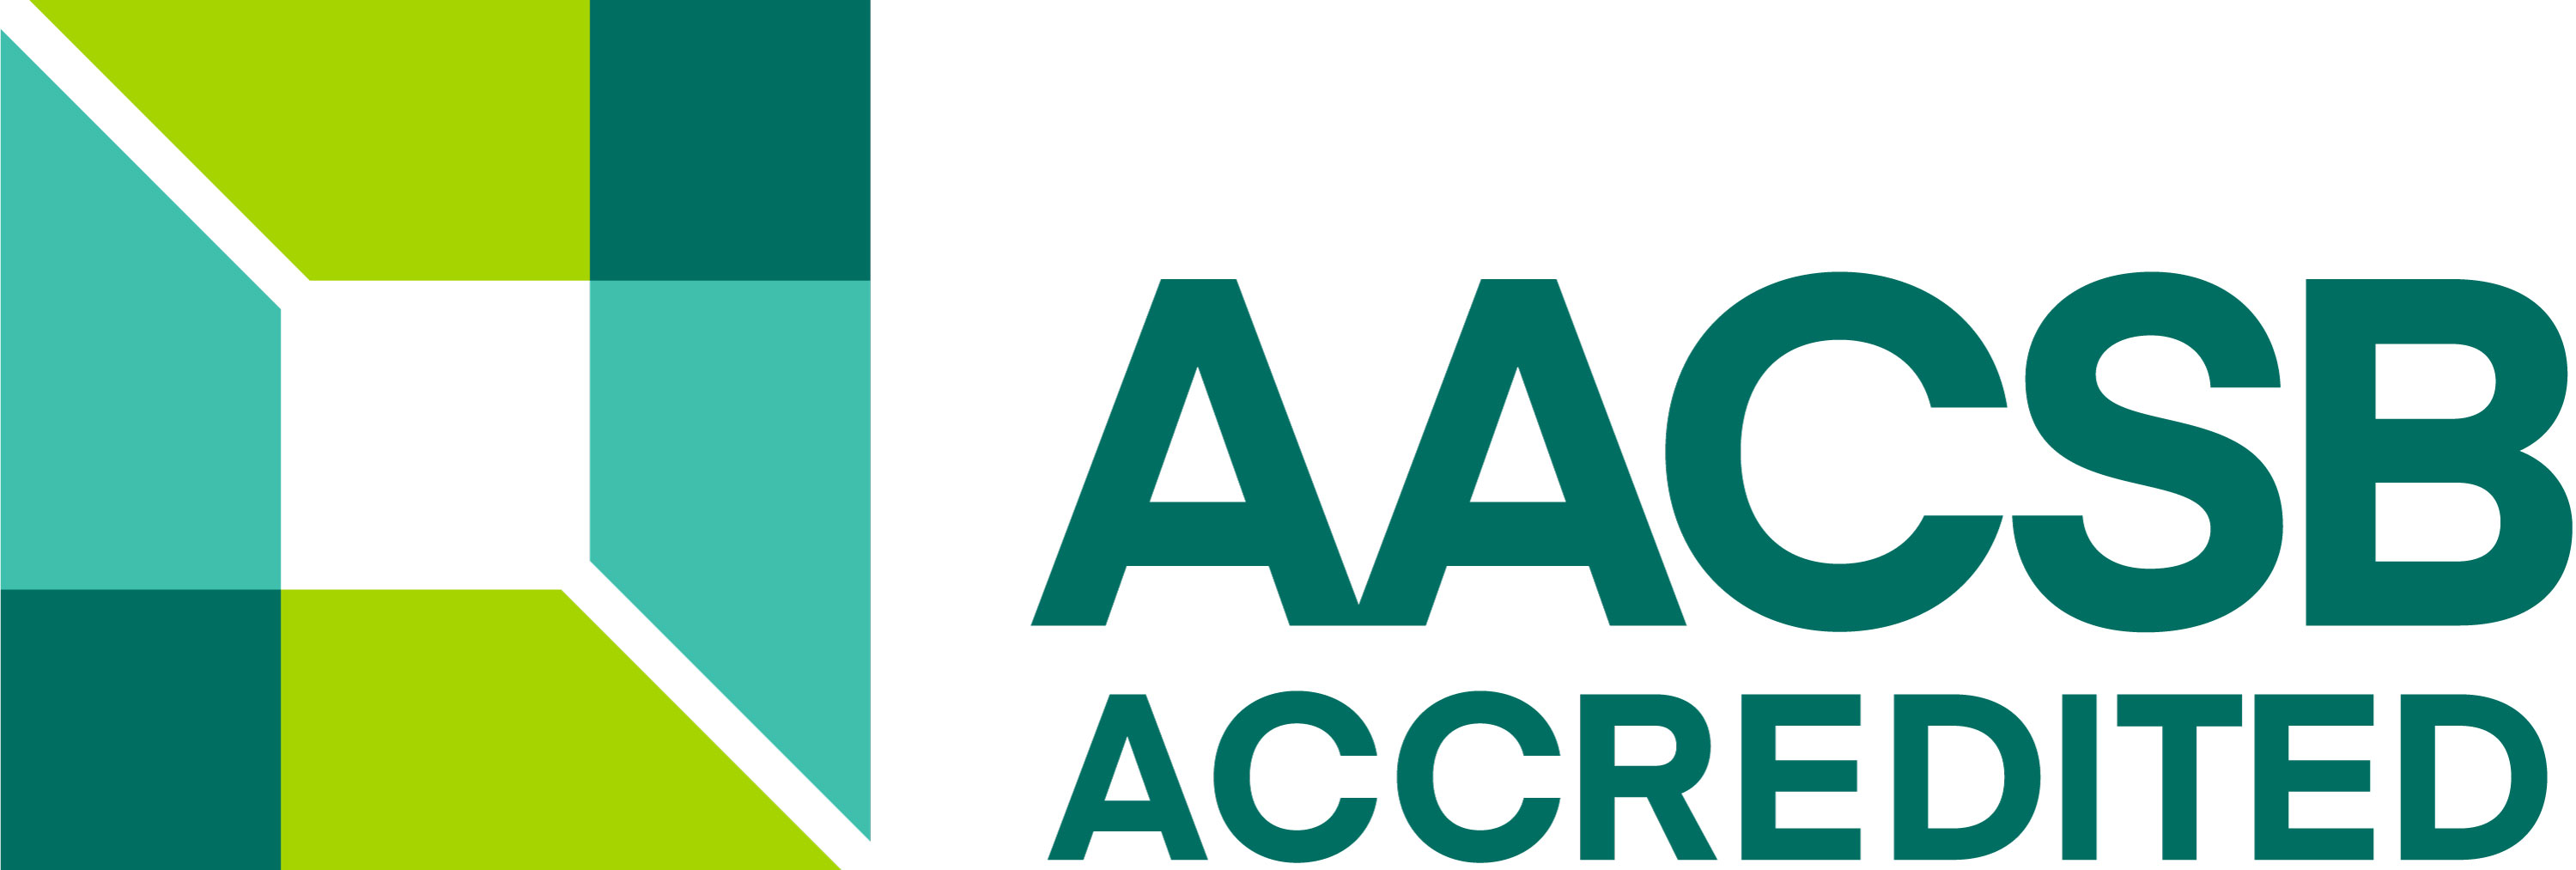 AACSB Logo - Color